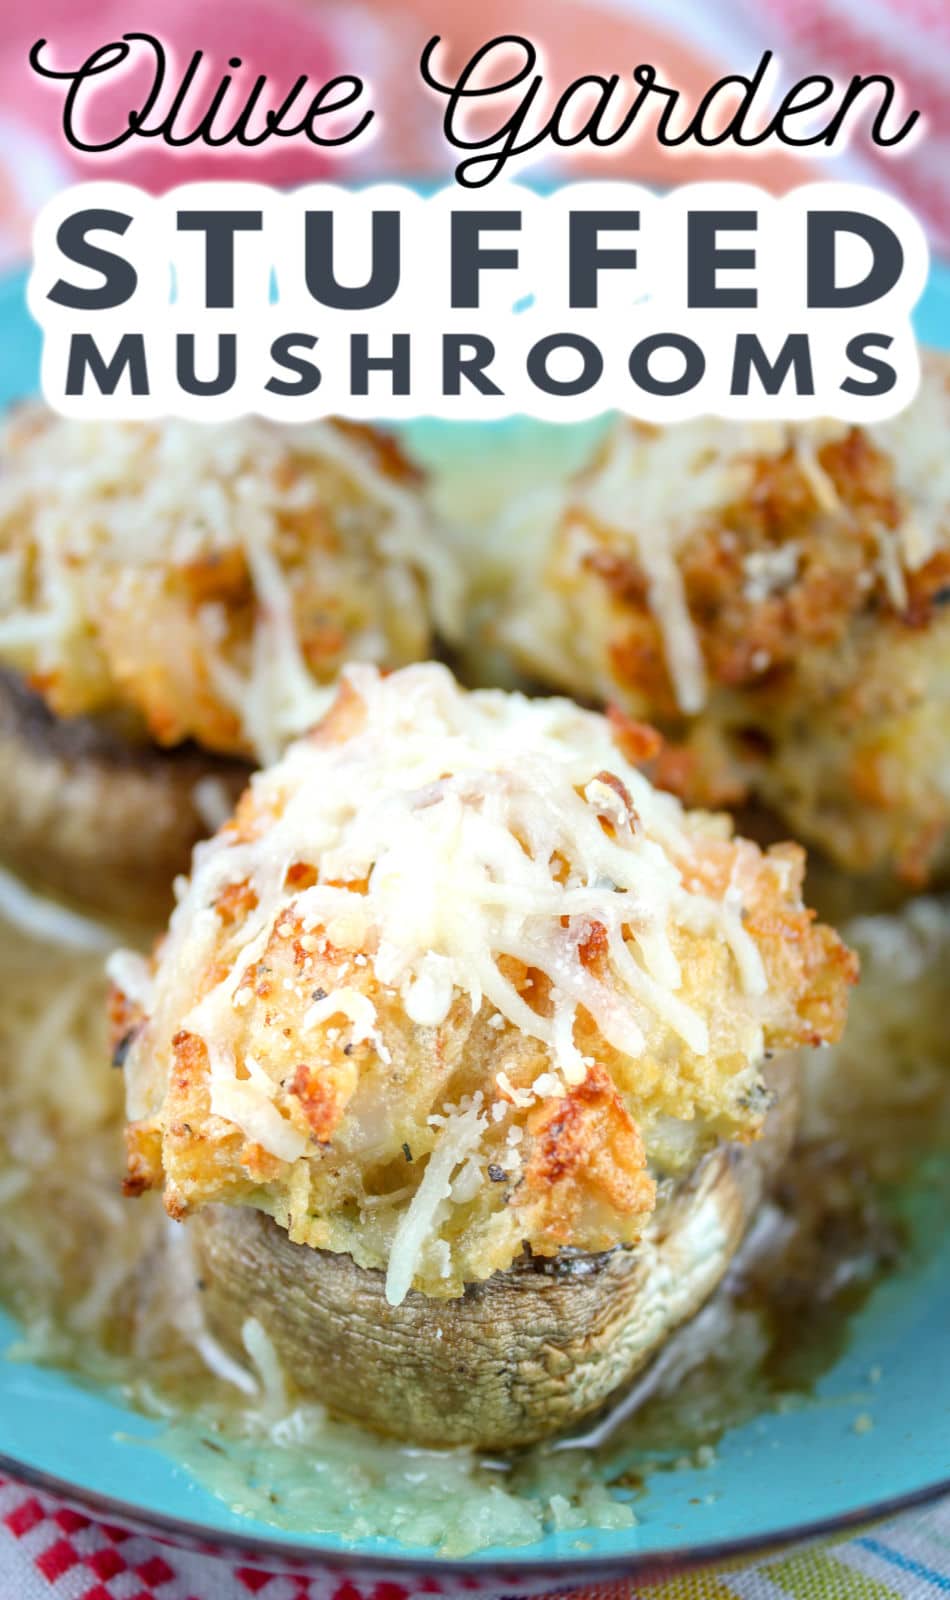 Olive Garden Stuffed Mushrooms are one of their most popular appetizers and surprisingly easy to make at home! These delightful bites are stuffed with shrimp & scallops, cheese and breadcrumbs.
 via @foodhussy